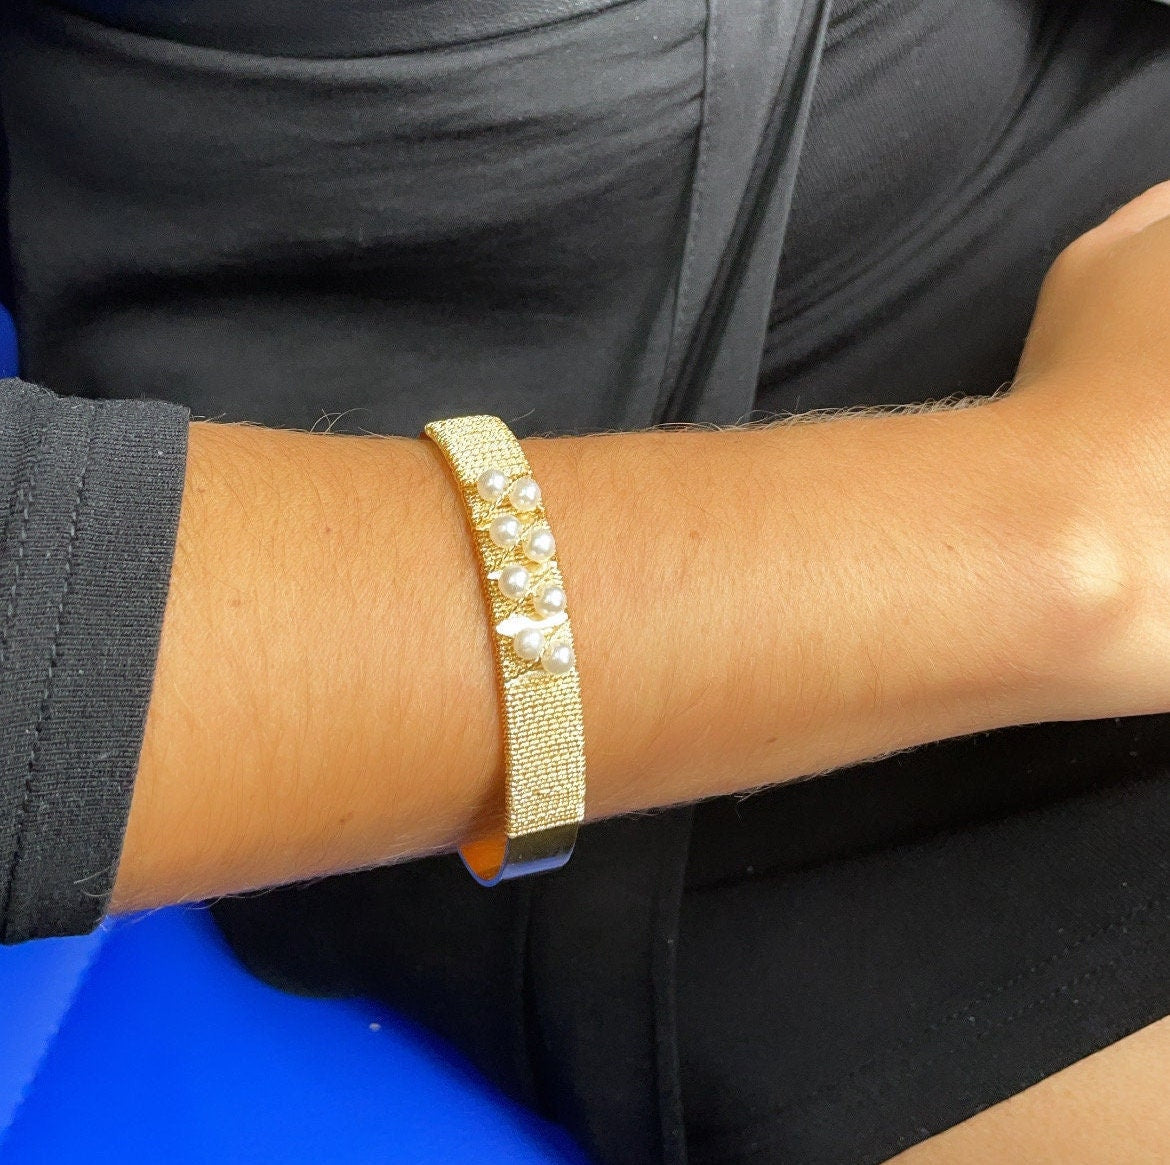 18k Gold Layered Plain Cuff Bracelet Wrapped In Gold Thread And Pearls Detail,